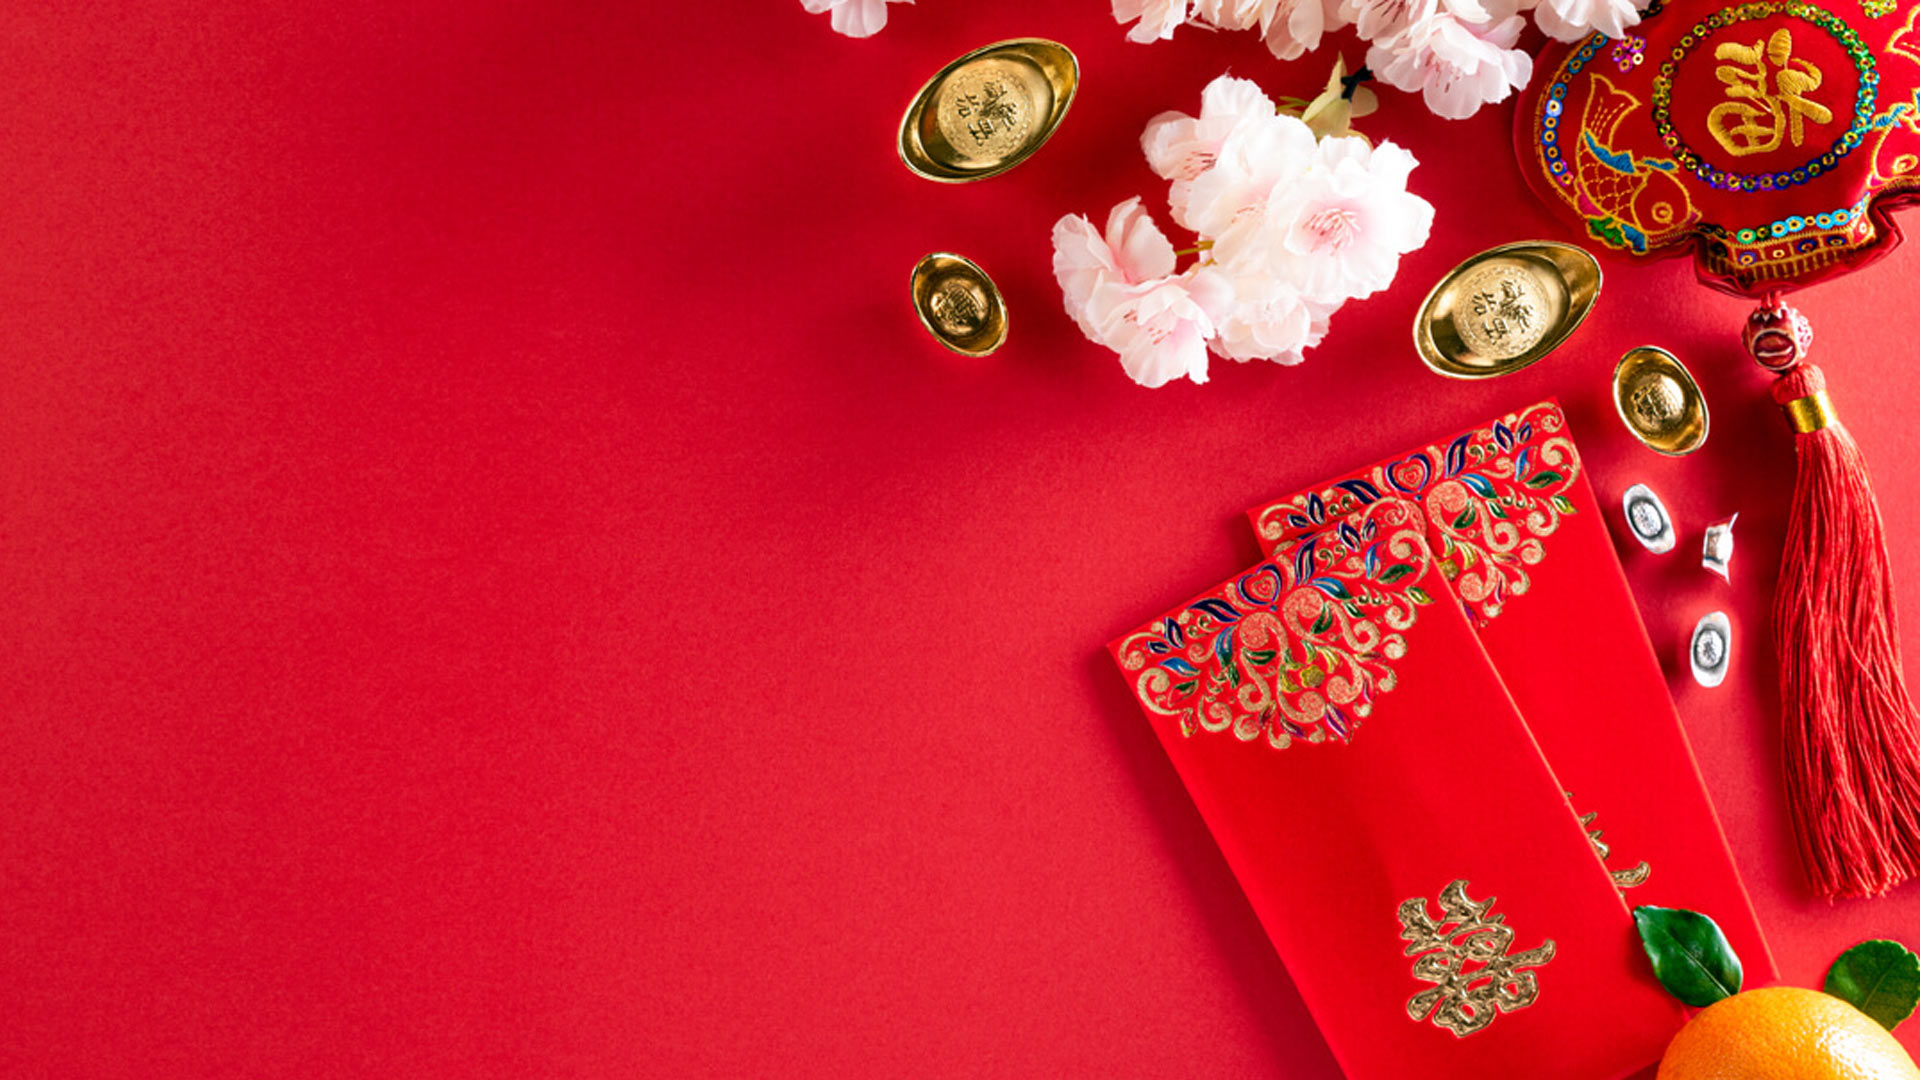 An image of Chinese ornaments, an orange and flowers on the red background. Chinese New Year lessons: Portfolio diversification